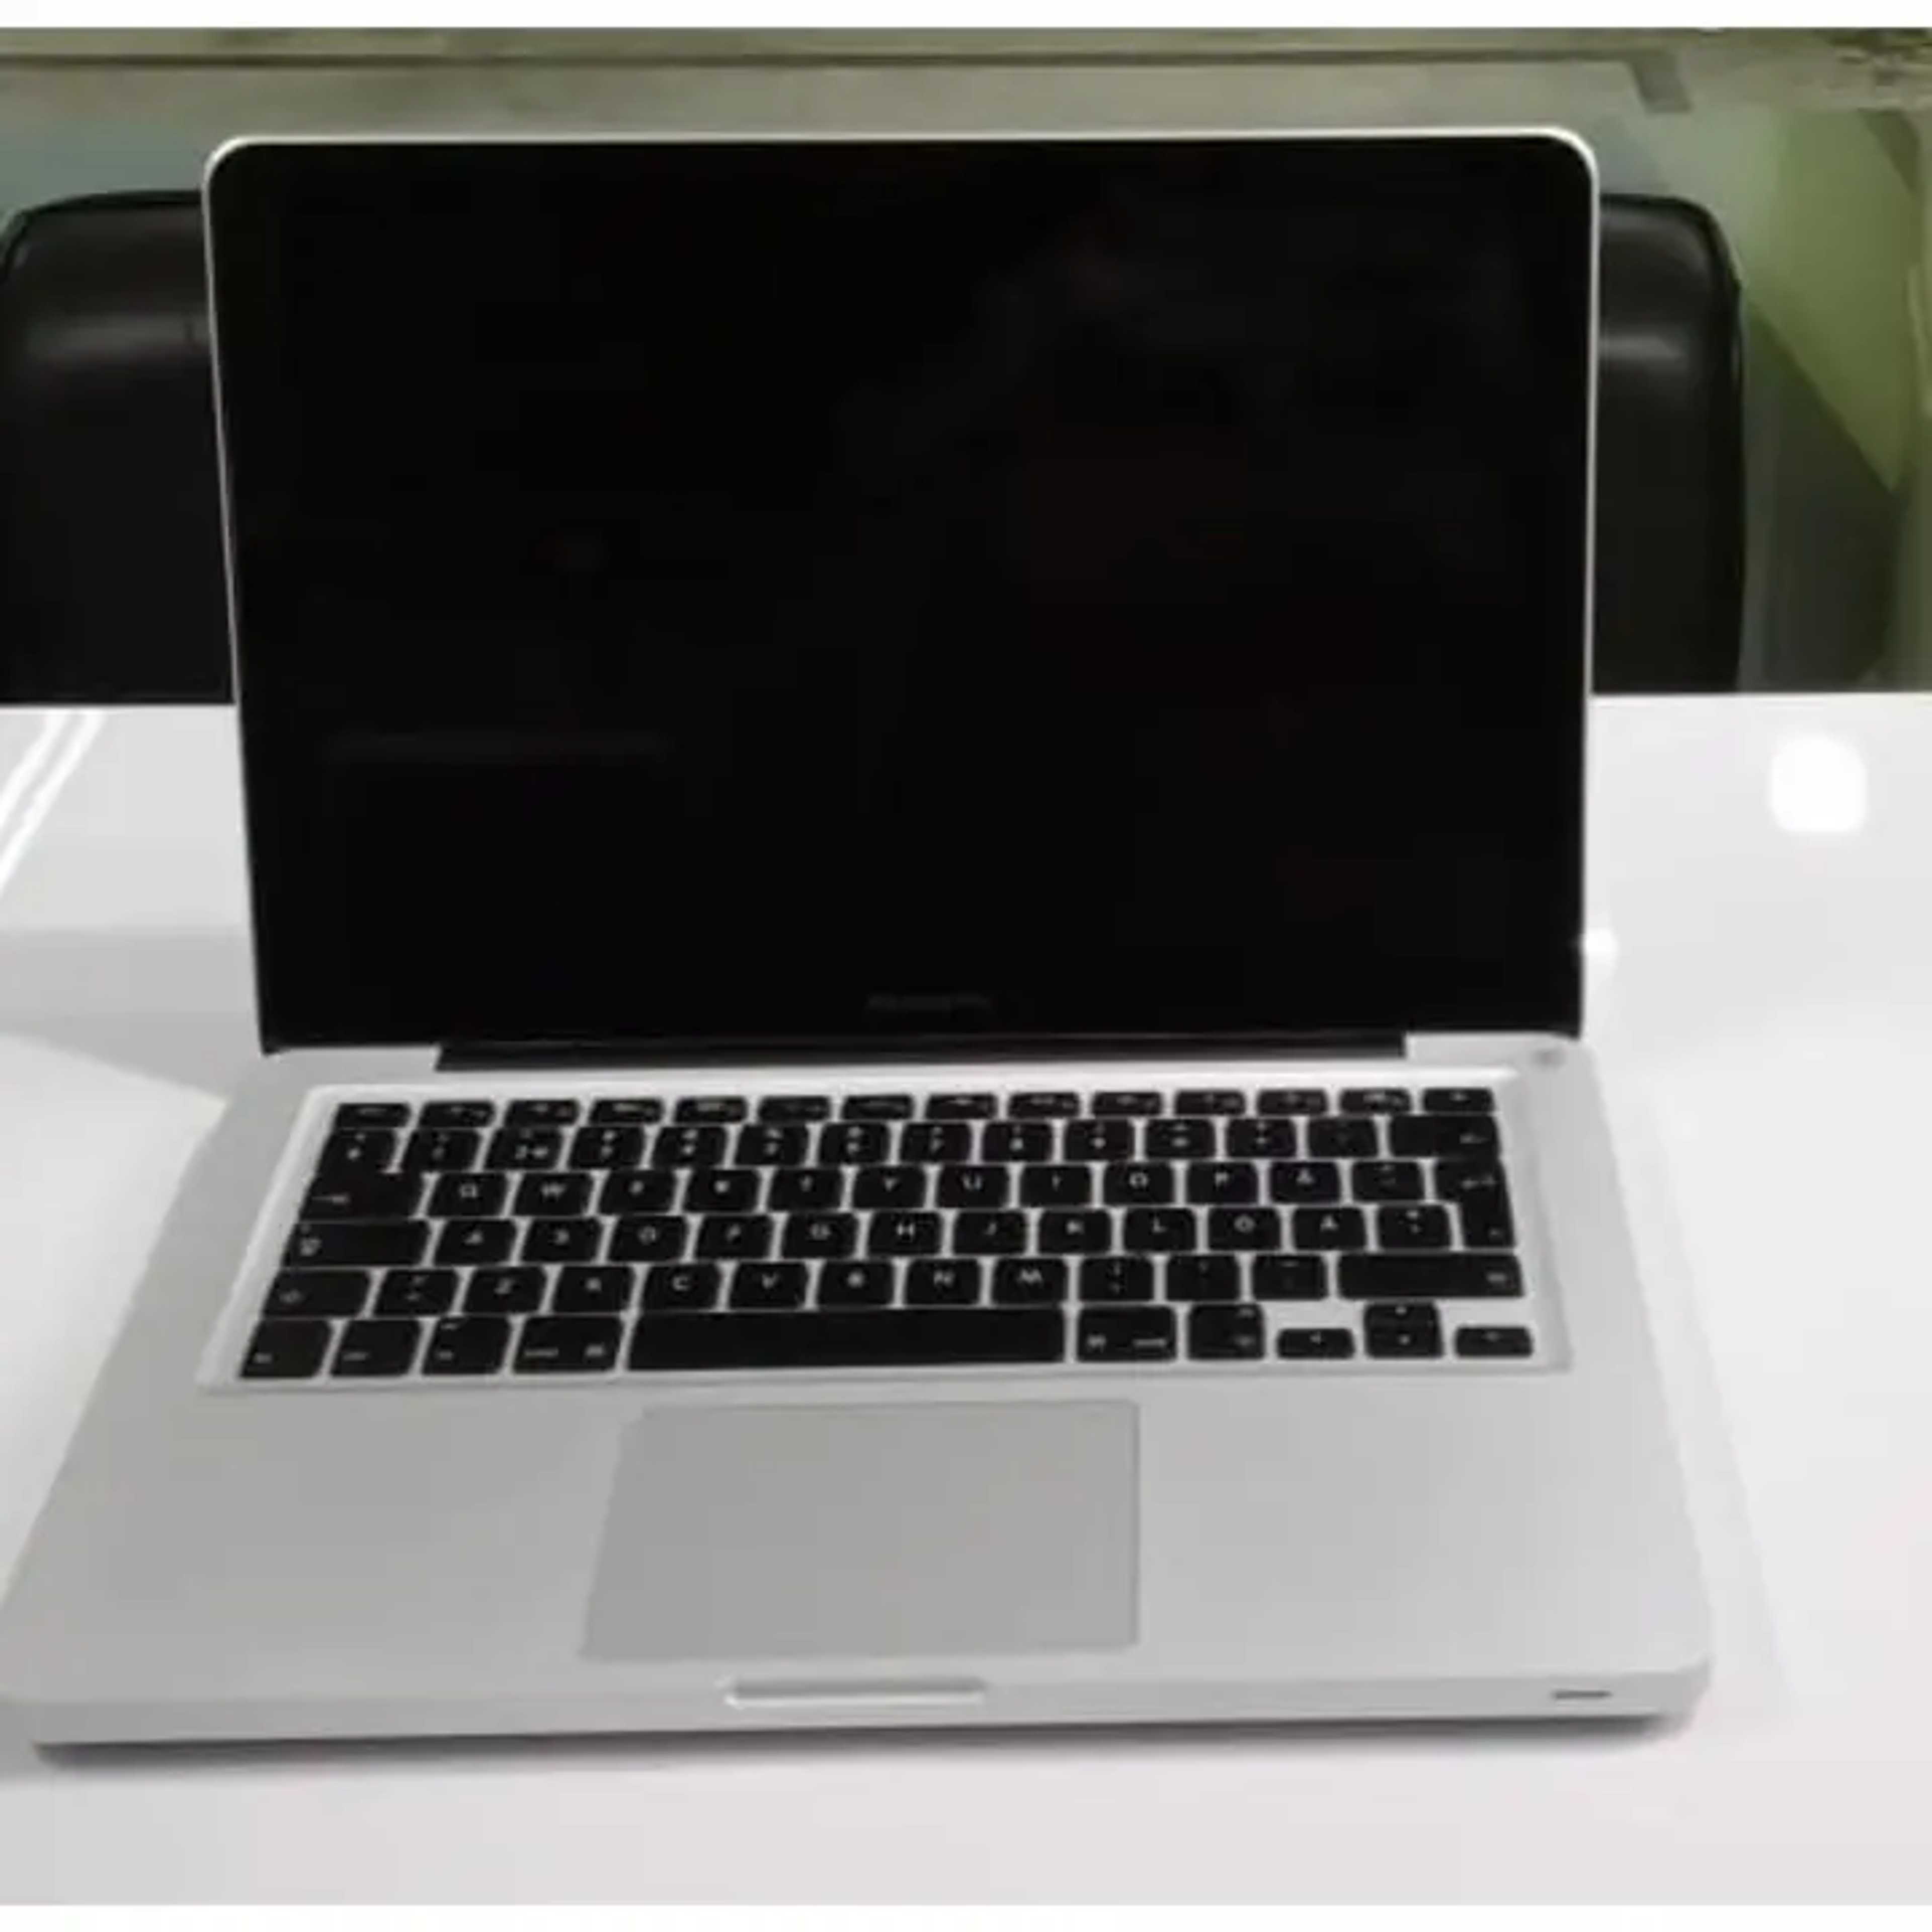 Apple MacBook Pro 2012  256GB SSD Storage  4GB RAM  2.5GHz Dual-Core Core i5  Mid 2012  13.3-inch LED Display  Dual Operating system Window and macOS  Silver